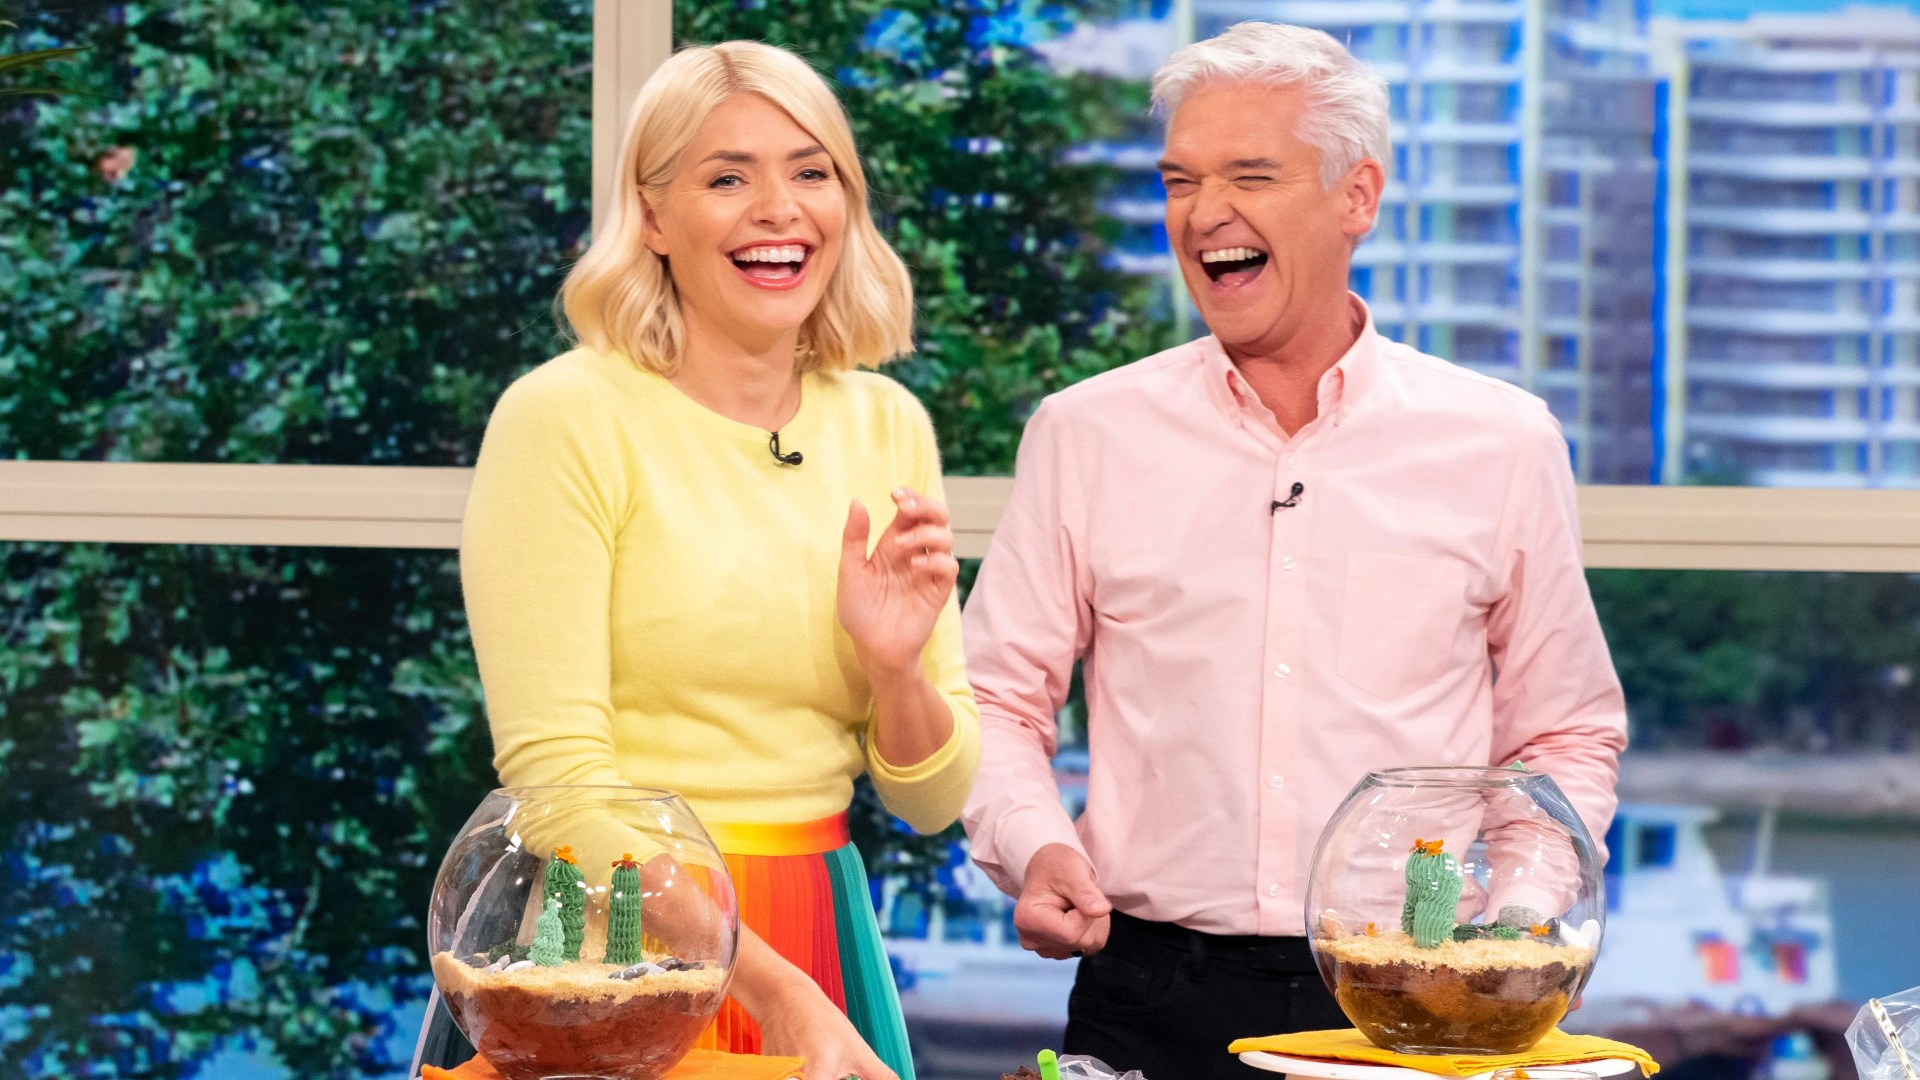 Gino’s X-rated jokes and animal antics: This Morning’s top blunders exposed!